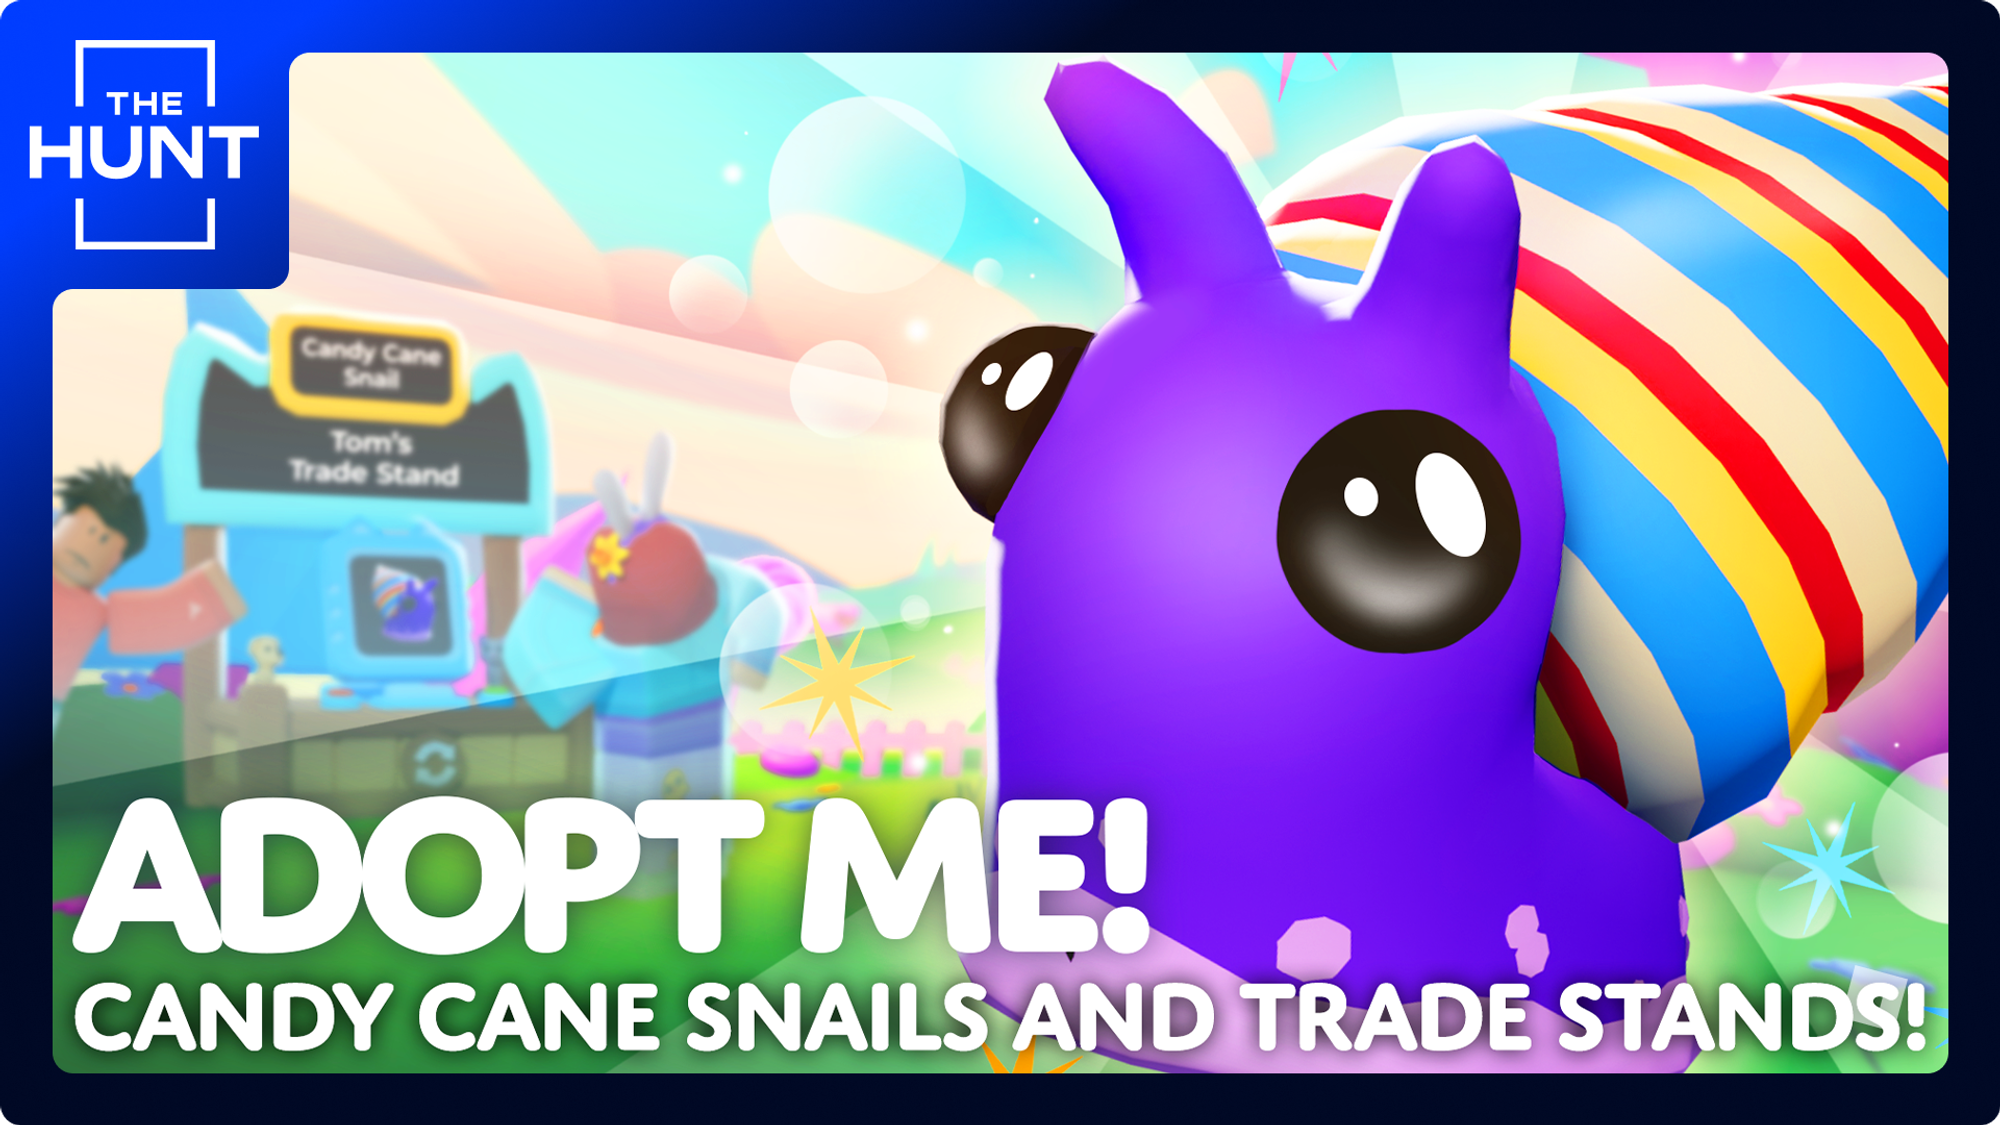 Candy Cane Snail welcomes you to the second week of Easter updates in Adopt Me! Subtext reads: "Candy Cane Snails and Trade Stands!"